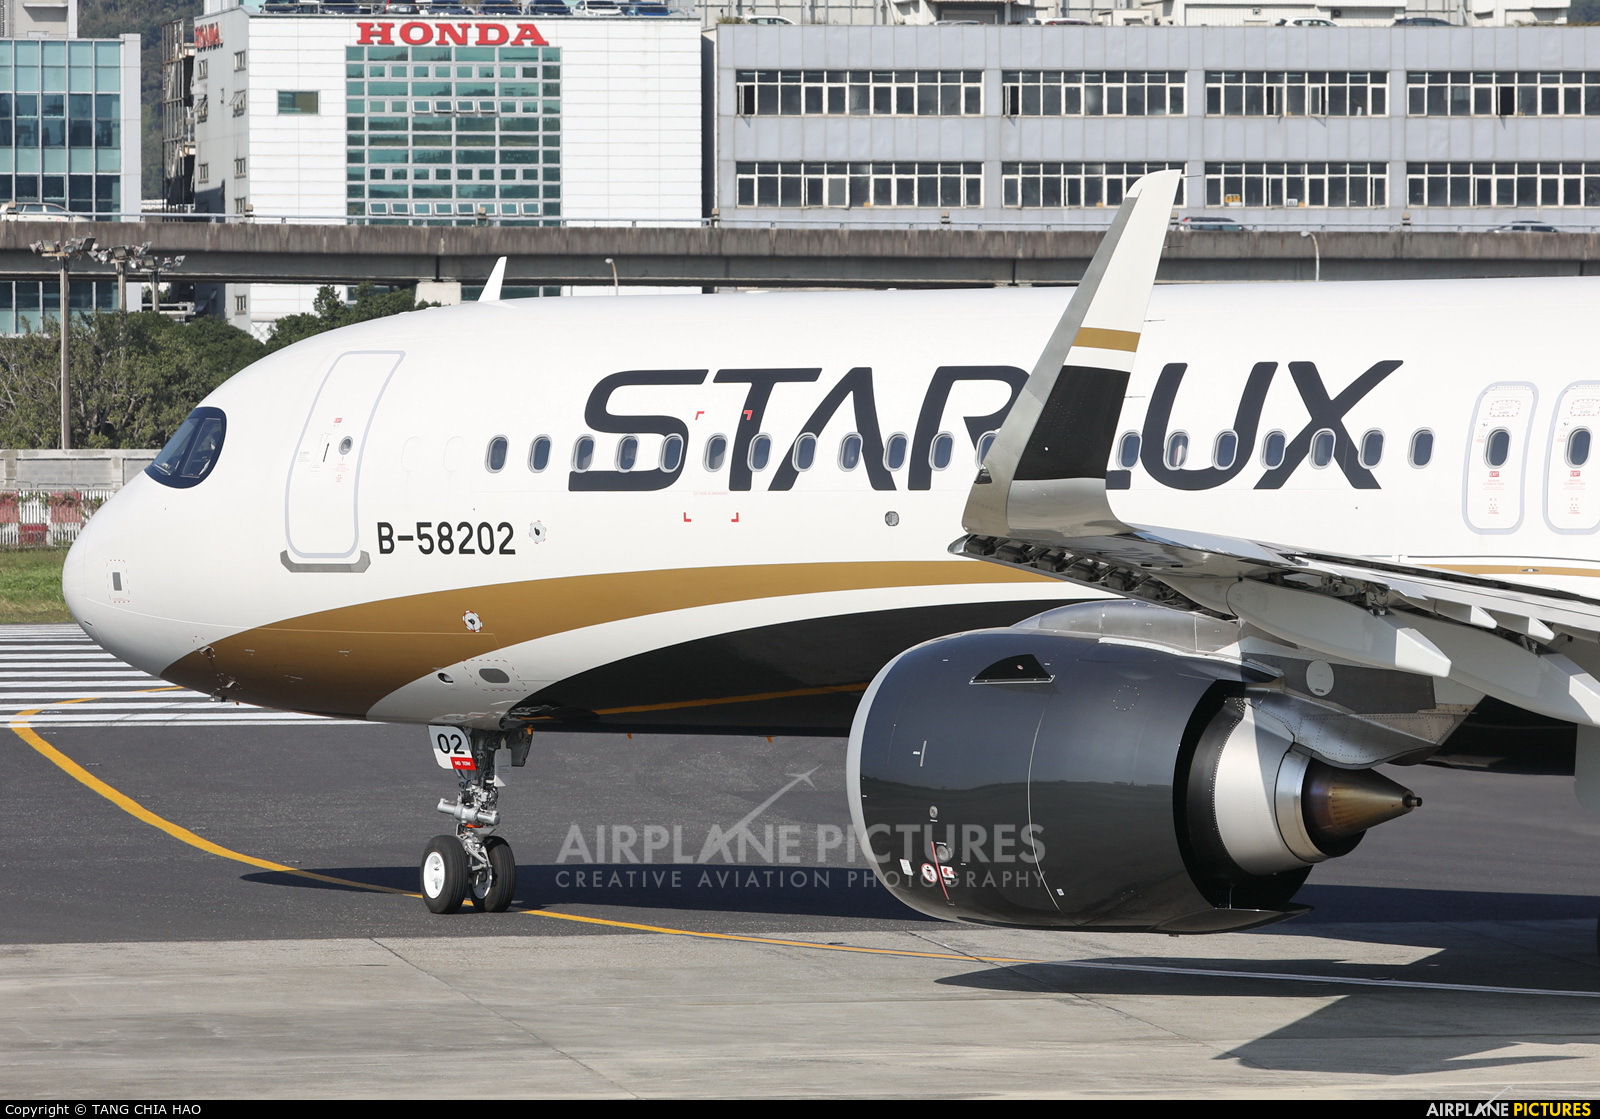 Starlux Airlines B-58202 aircraft at Taipei Sung Shan/Songshan Airport